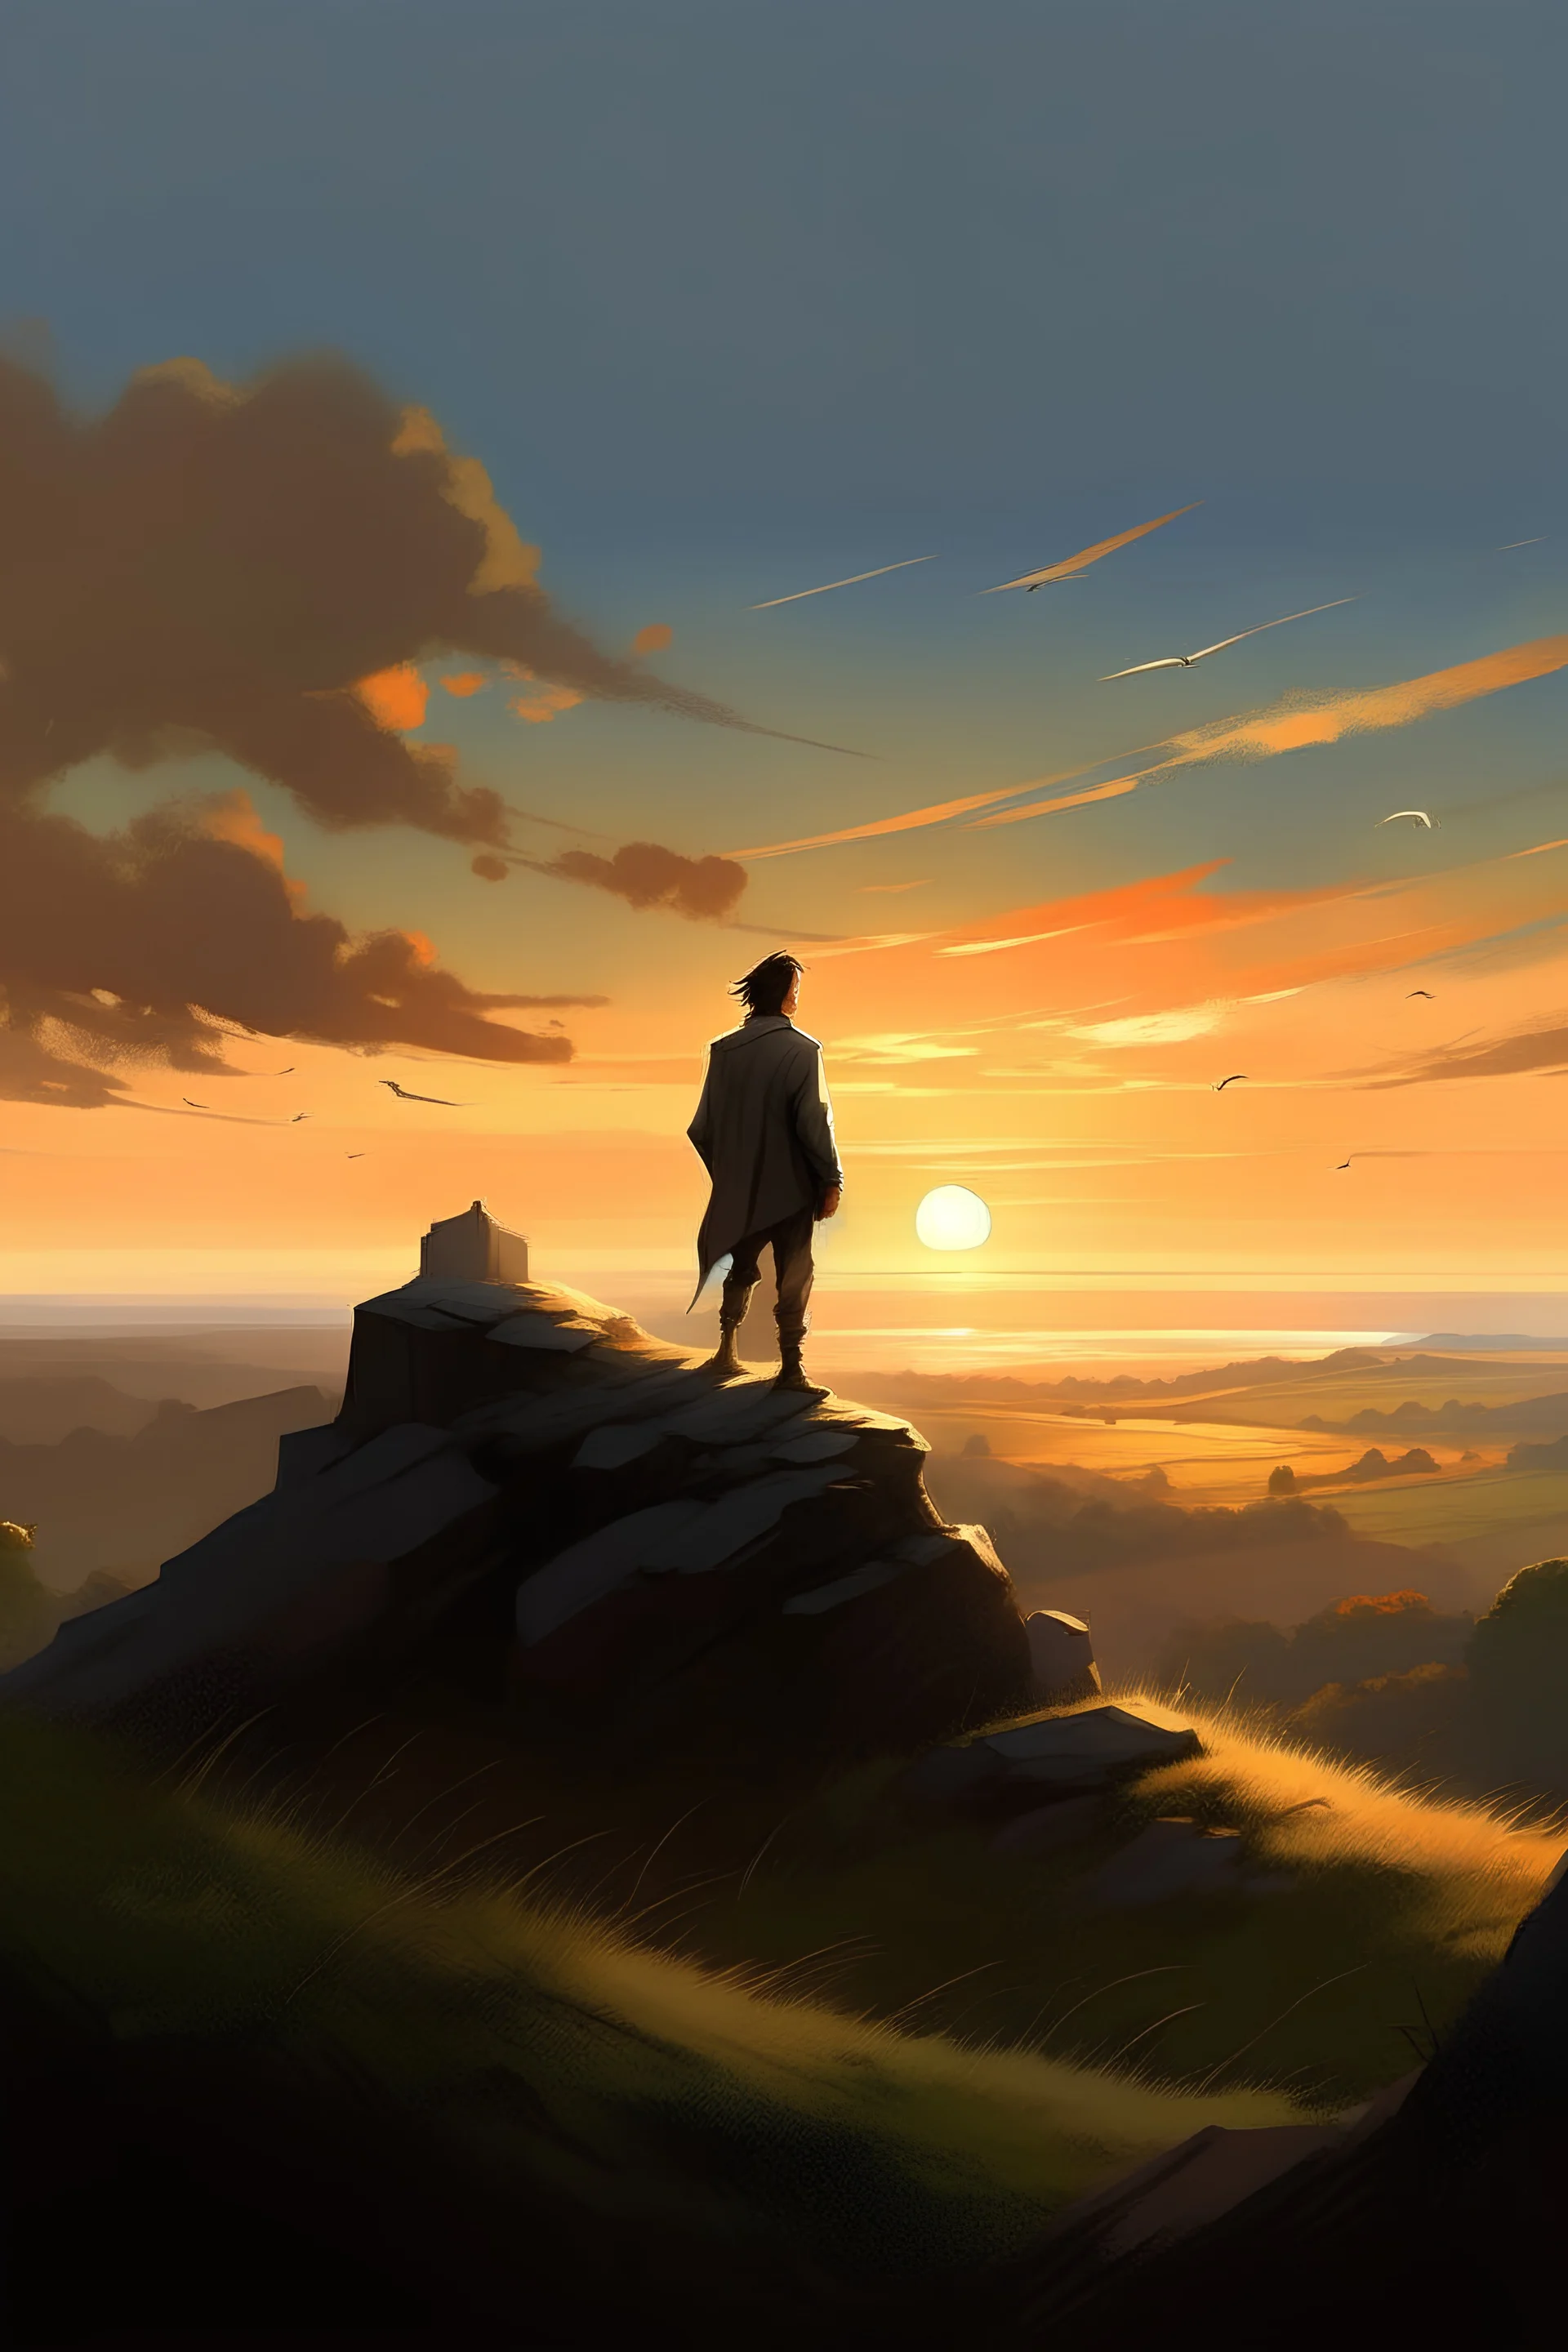 Description: Create an image capturing the essence of resilience and growth depicted in the story. The scene should feature a young man standing atop a hill at dusk, gazing at the sunset with a mix of determination and reflection in his eyes. The wind gently rustles his hair as he prepares to descend the hill, symbolizing his resolve to learn from past failures and embark on a new journey with wisdom and hope. The image should convey a sense of inner strength, optimism, and the transformative po